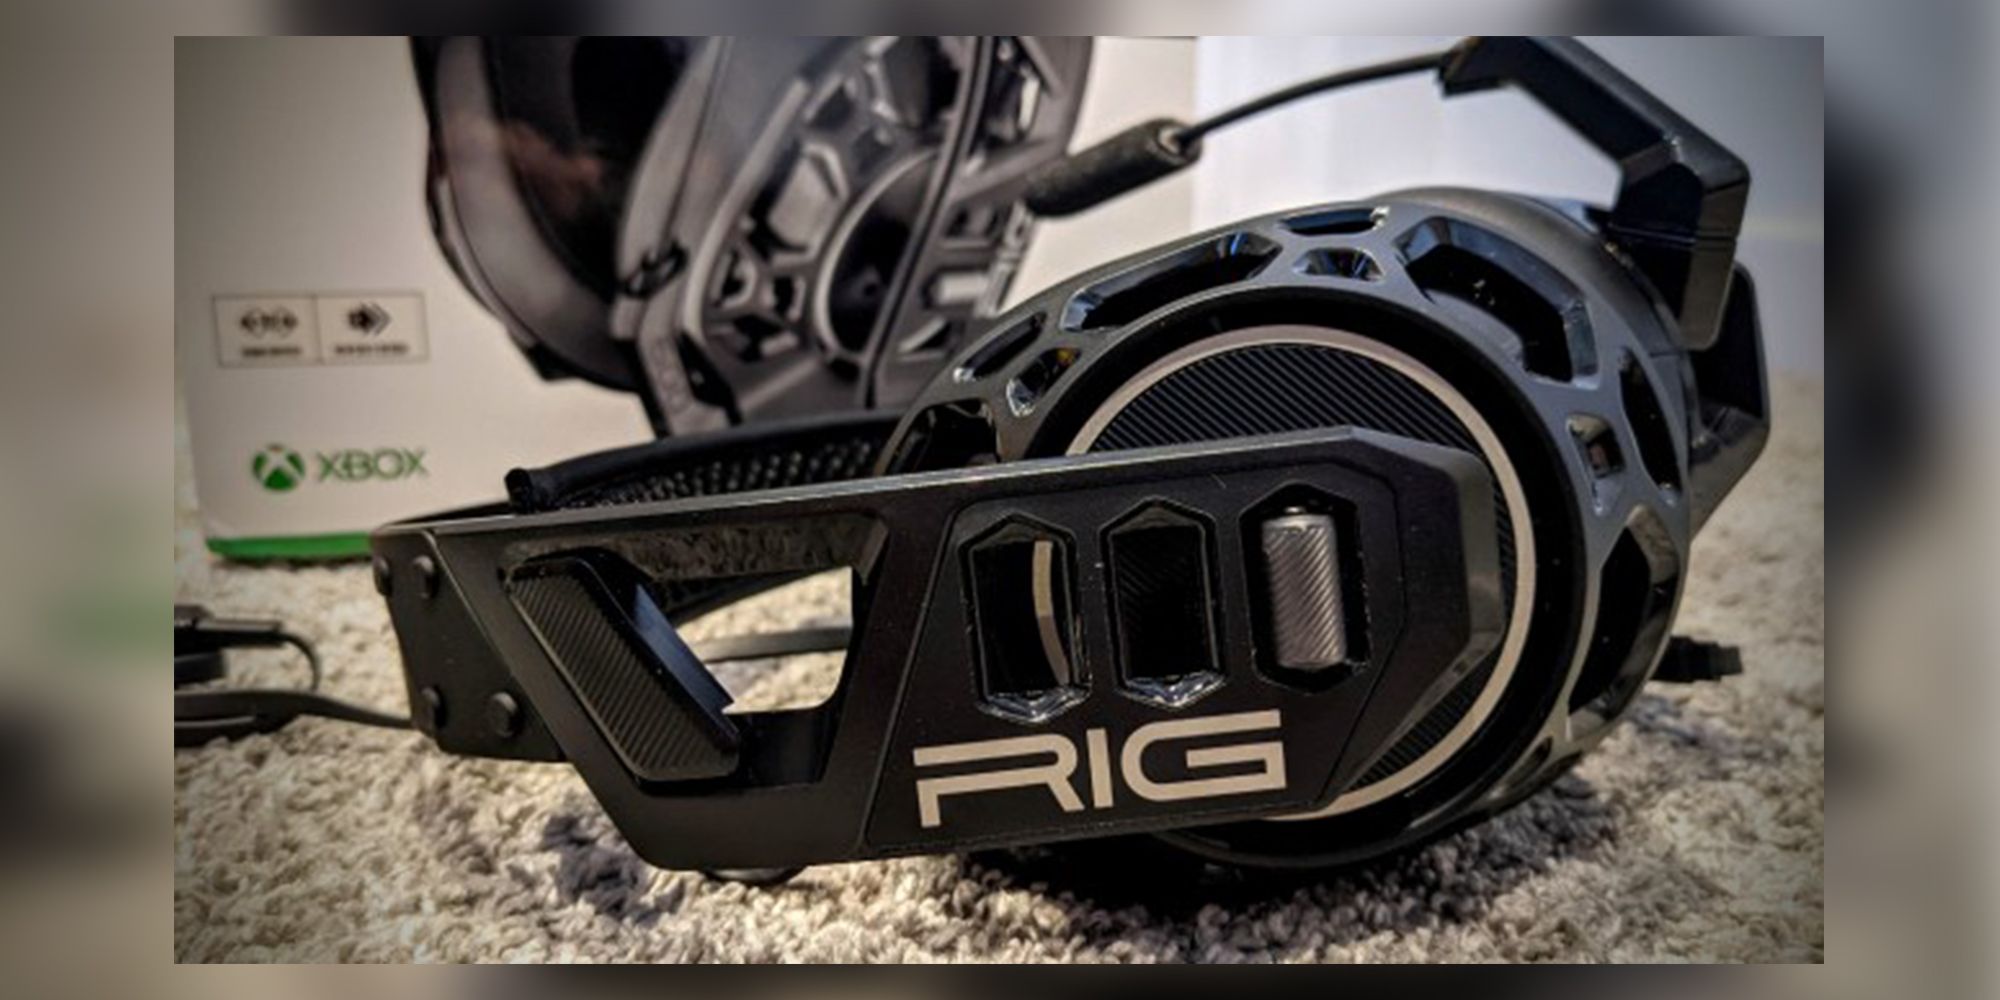 Nacon Rig 500 Pro HX 3D Audio Headset Review Strong QualityofLife Improvements